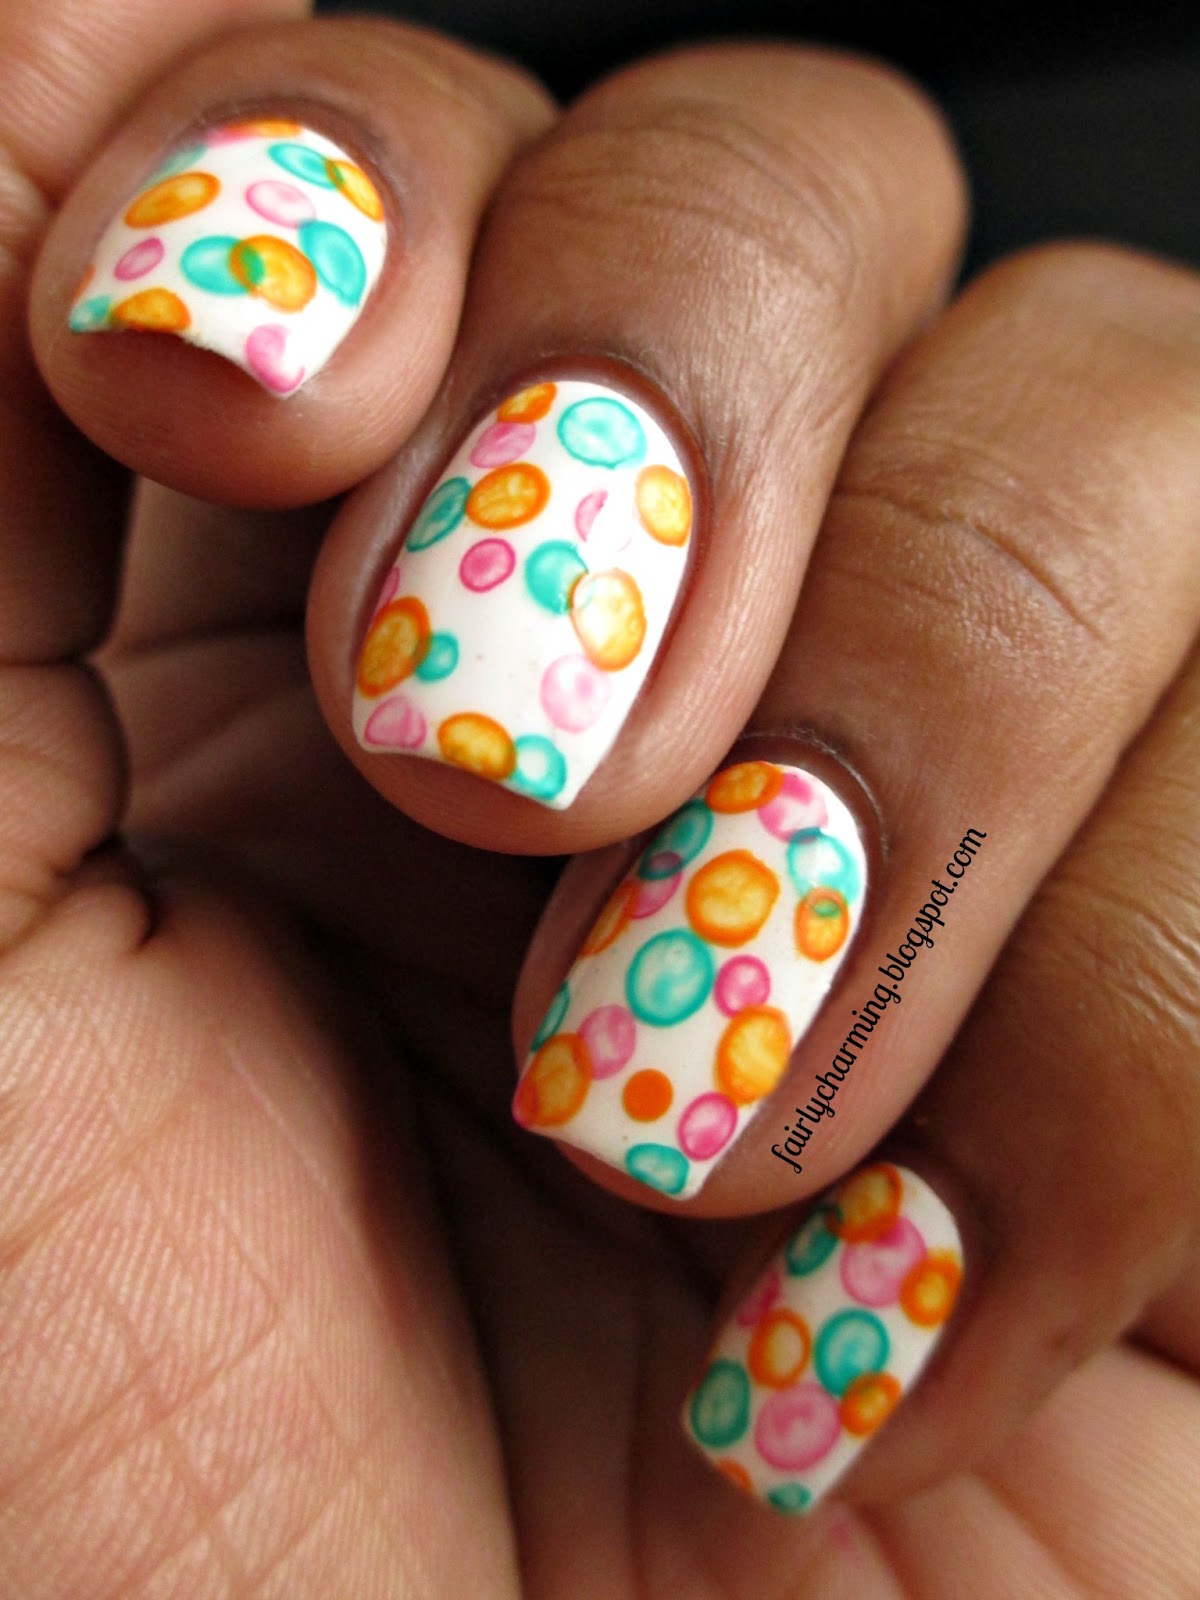 Fairly Charming: A Bright Bunch of Bubbles!